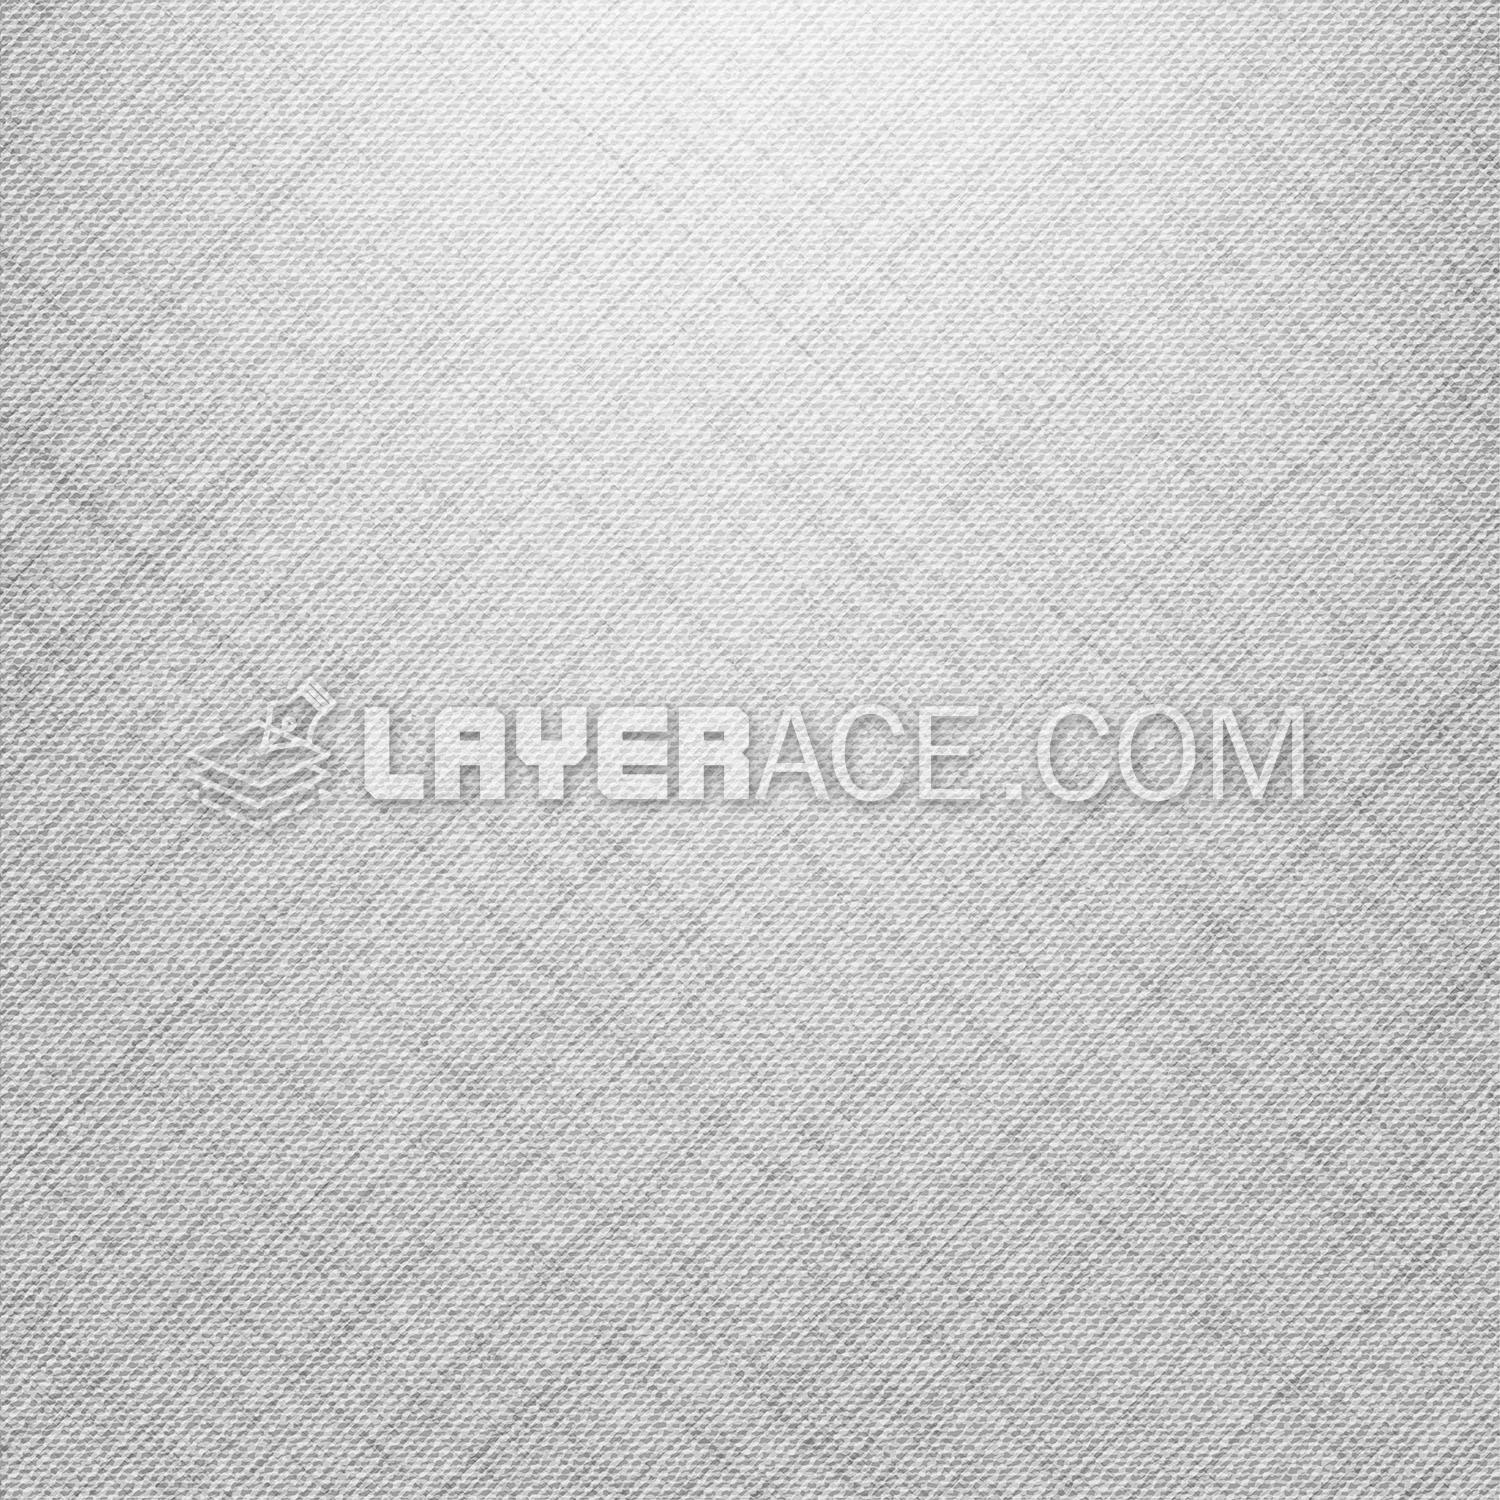 Gray Jeans Texture Vector